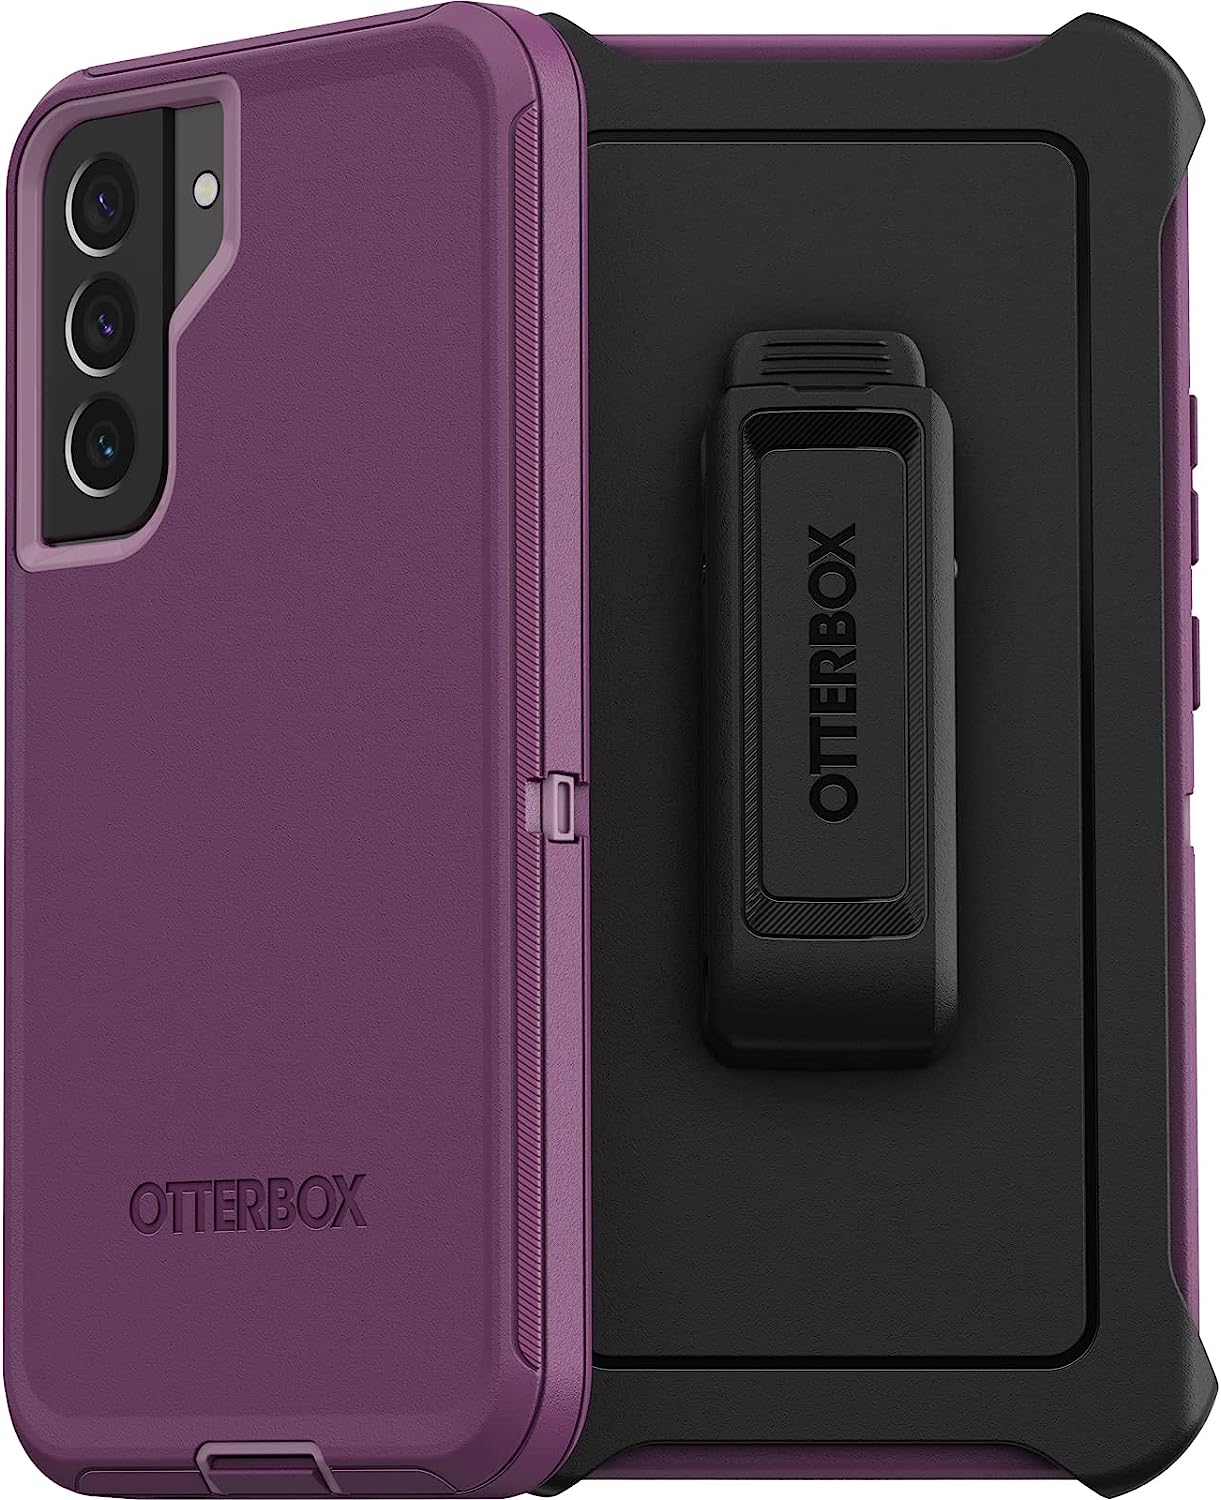 OtterBox DEFENDER SERIES Case for Samsung Galaxy S22+ - Happy Purple (New)